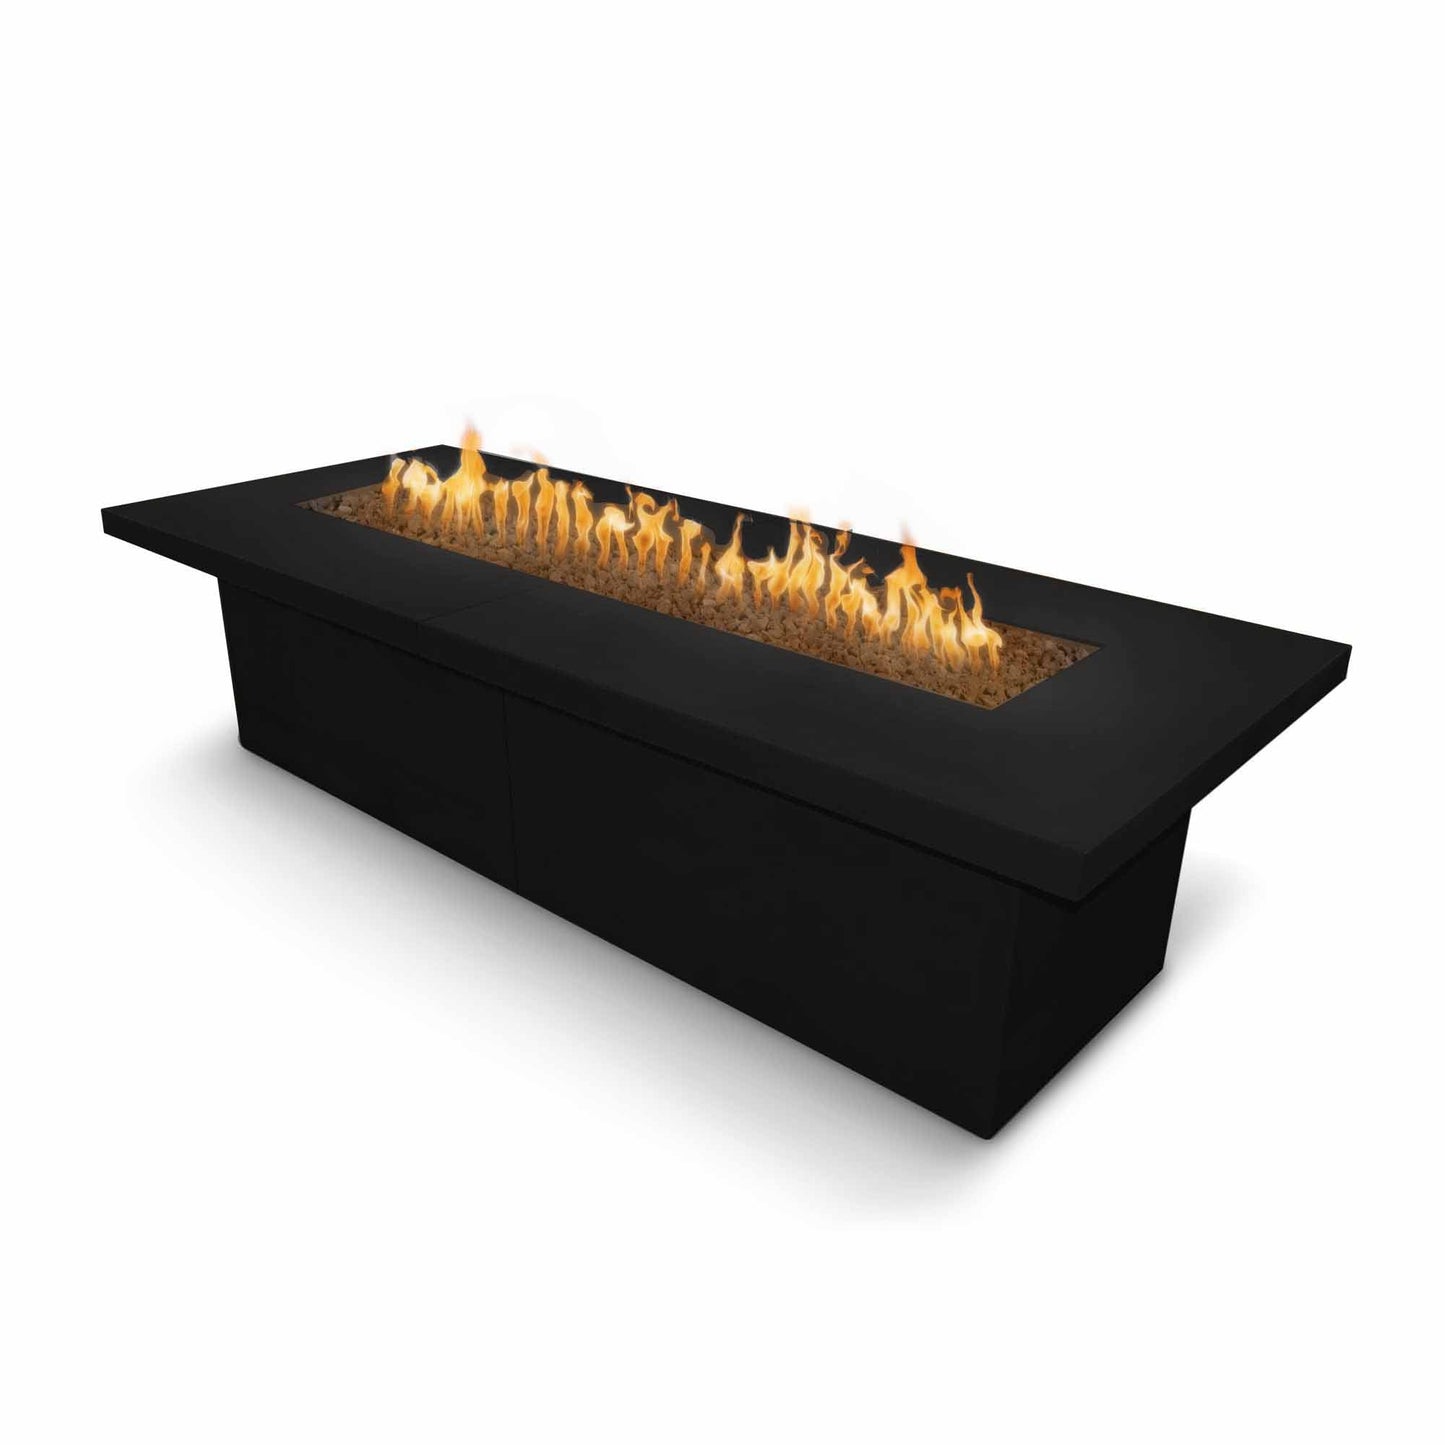 The Outdoor Plus Rectangular Newport 144" Silver Vein Powder Coated Metal Liquid Propane Fire Pit with Match Lit Ignition